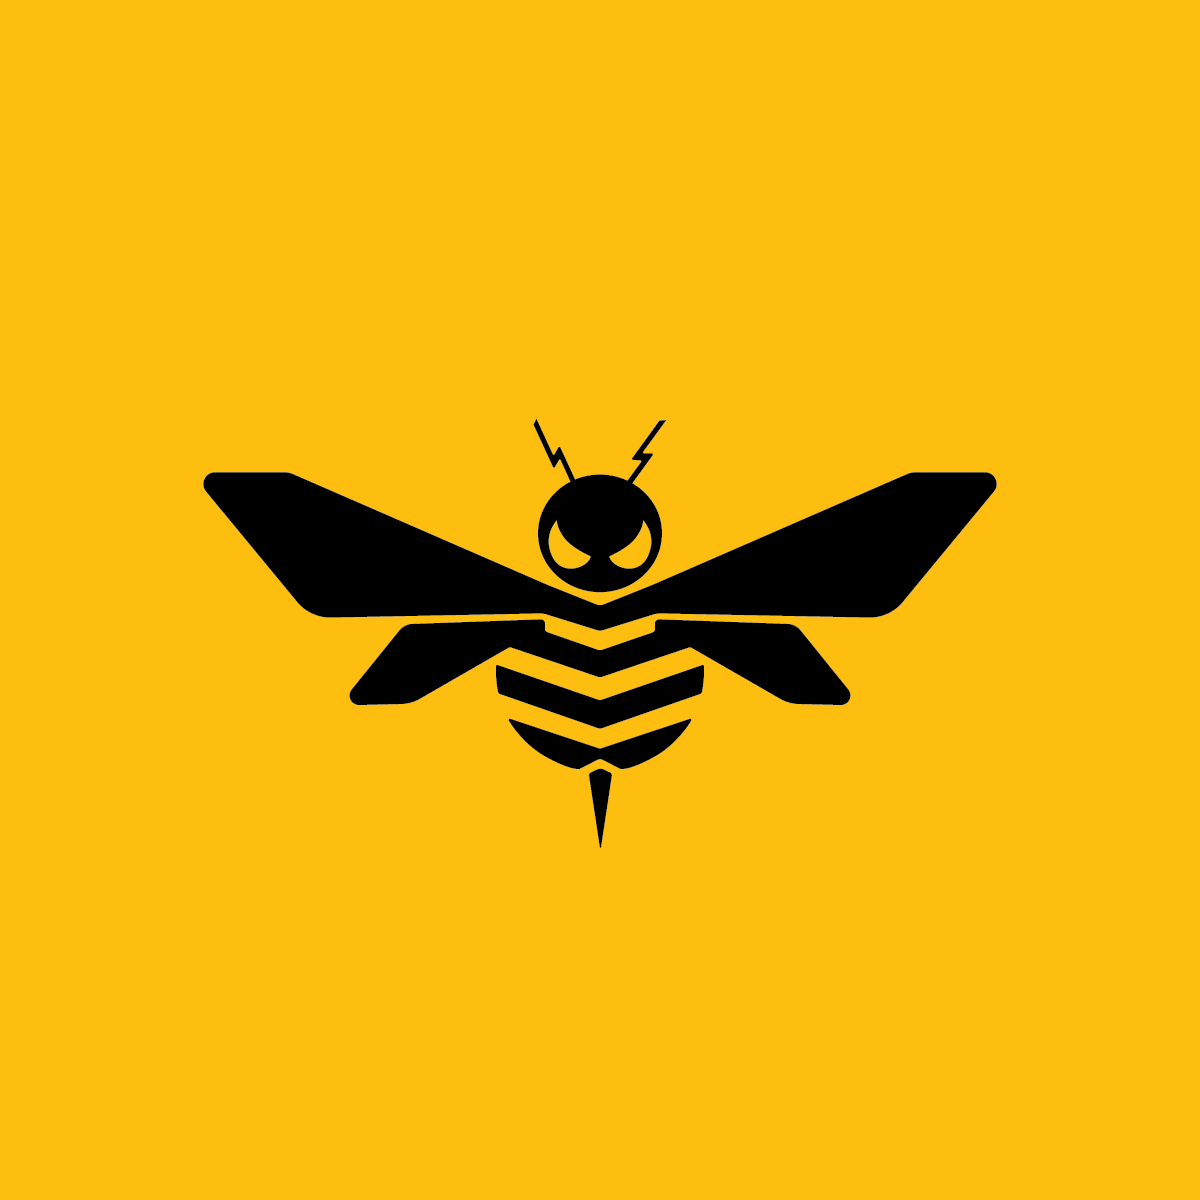 Bumblebee Logo - Transformers: Bumblebee Movie logo – Red Tail Design Company